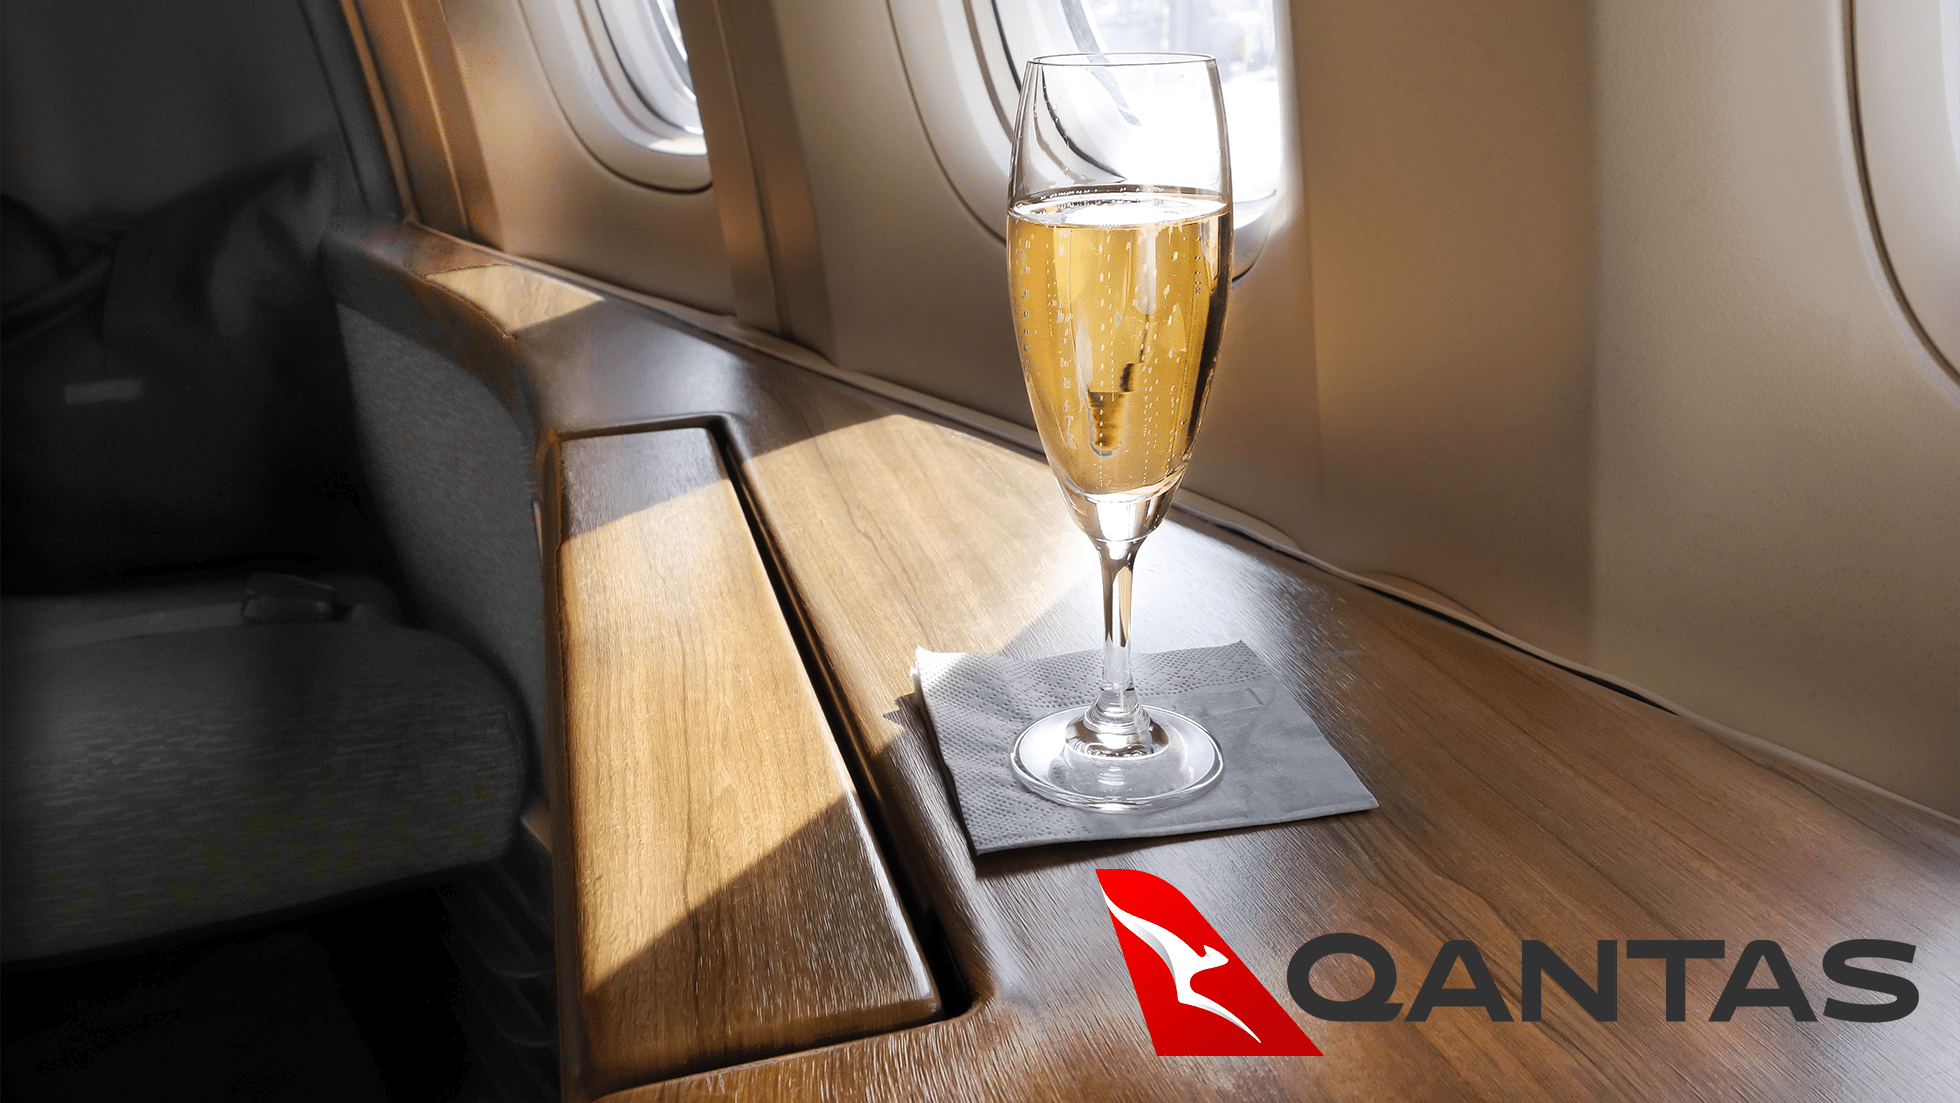 How to get an upgrade on Qantas